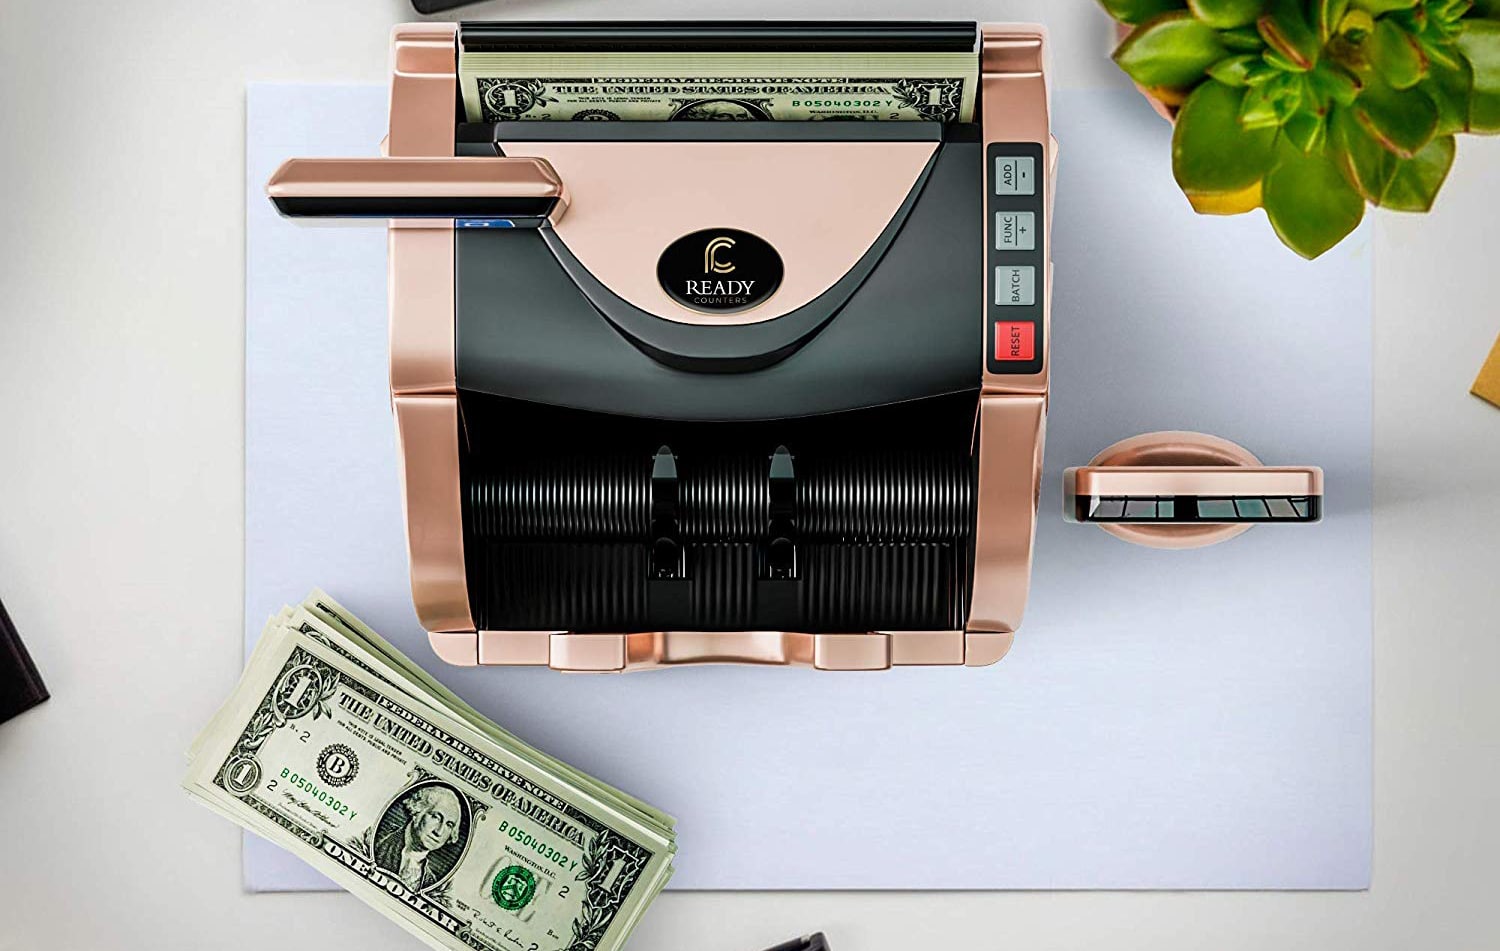 Top 10 Best Money Counting Machines in 2020 Reviews I Guide